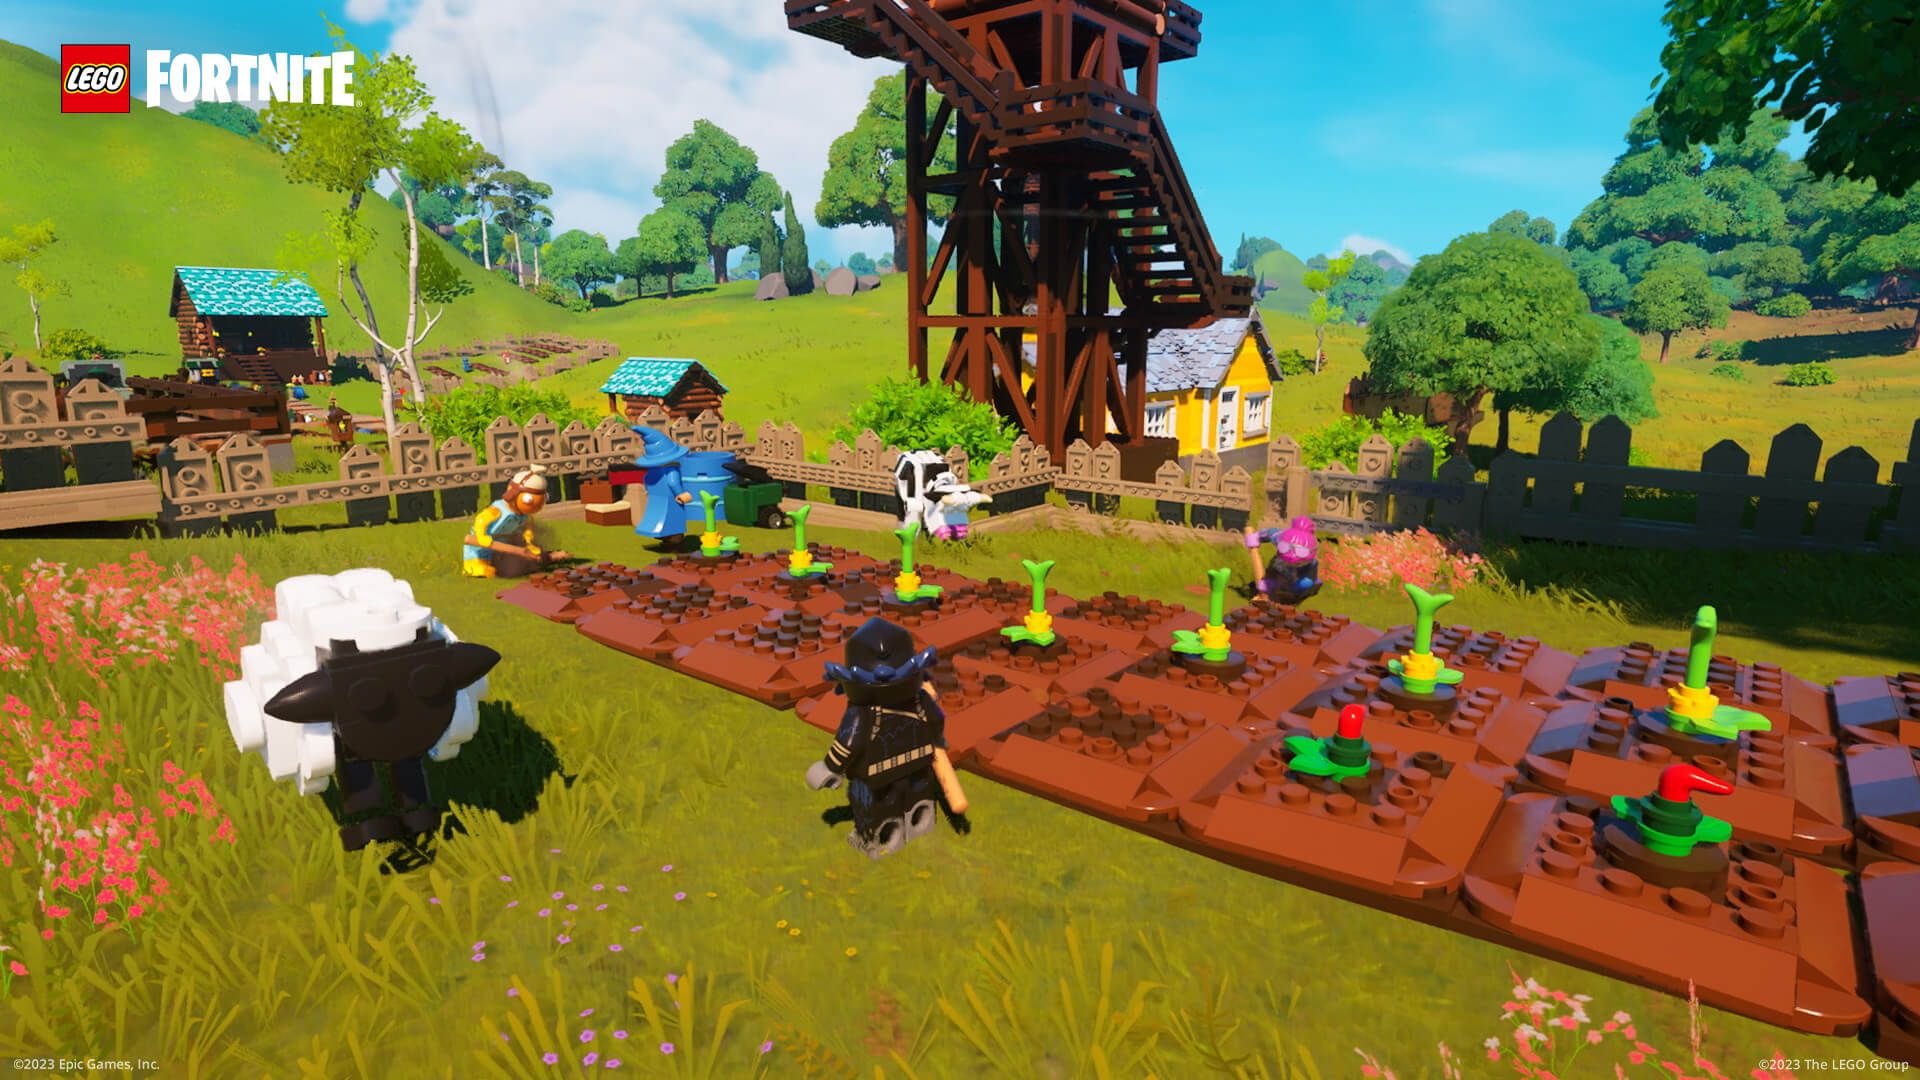 Lego Fortnite characters tending to a vegetable patch with a cow and sheep nearby.